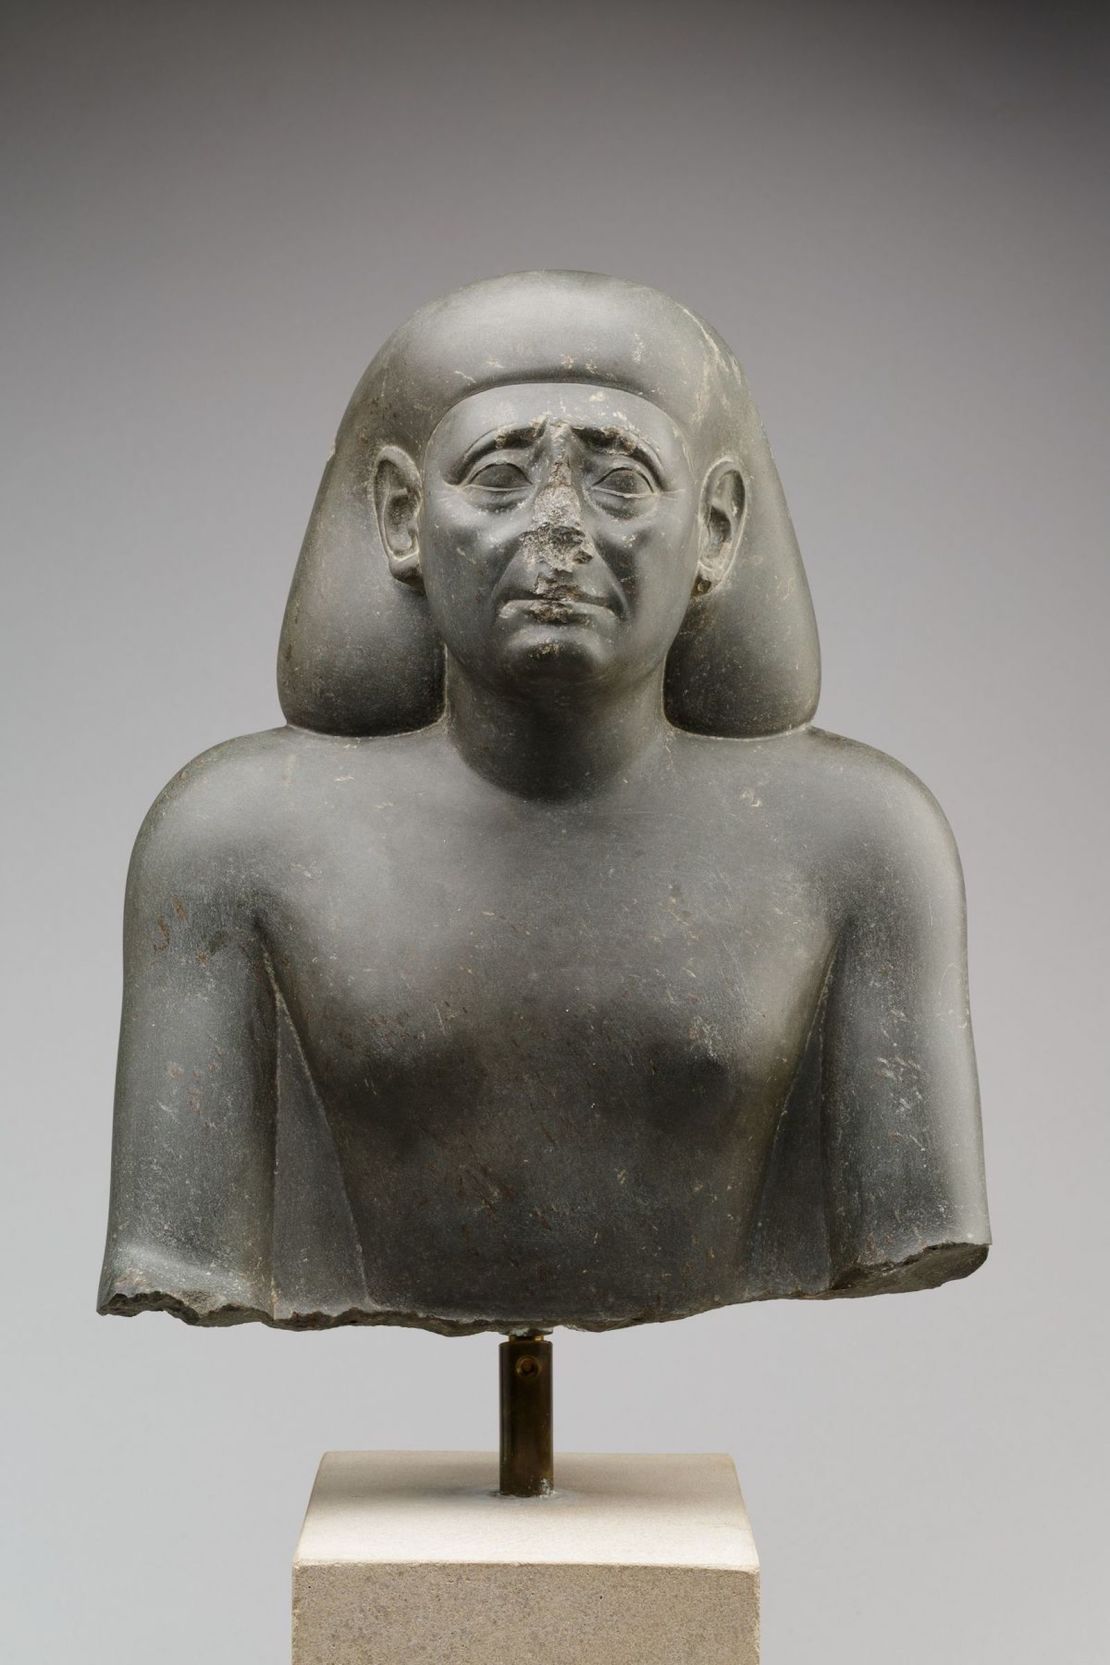 The bust of an Egyptian official dating from the 4th century BC.